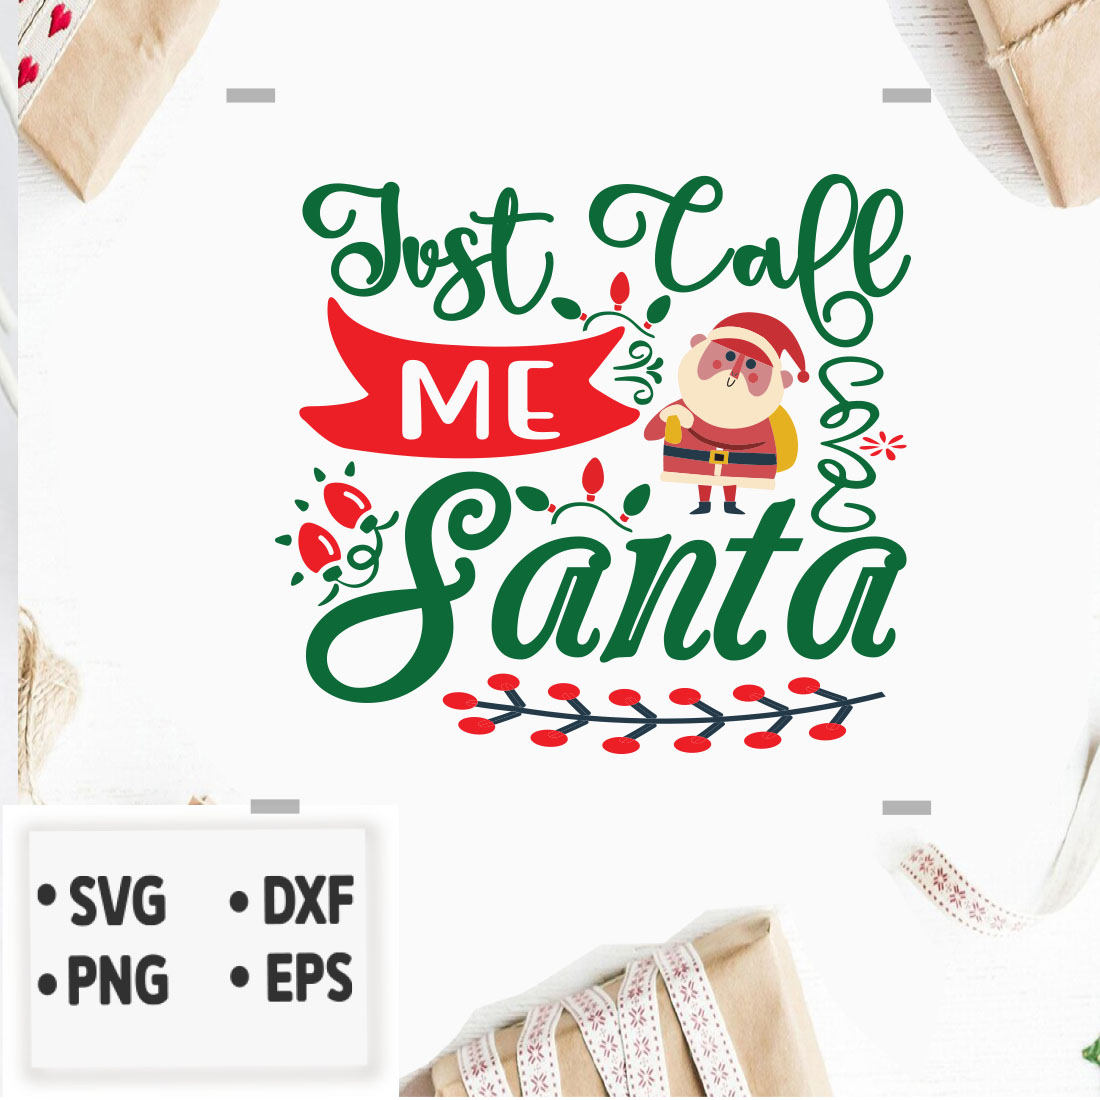 Image with gorgeous Just call me santa print.